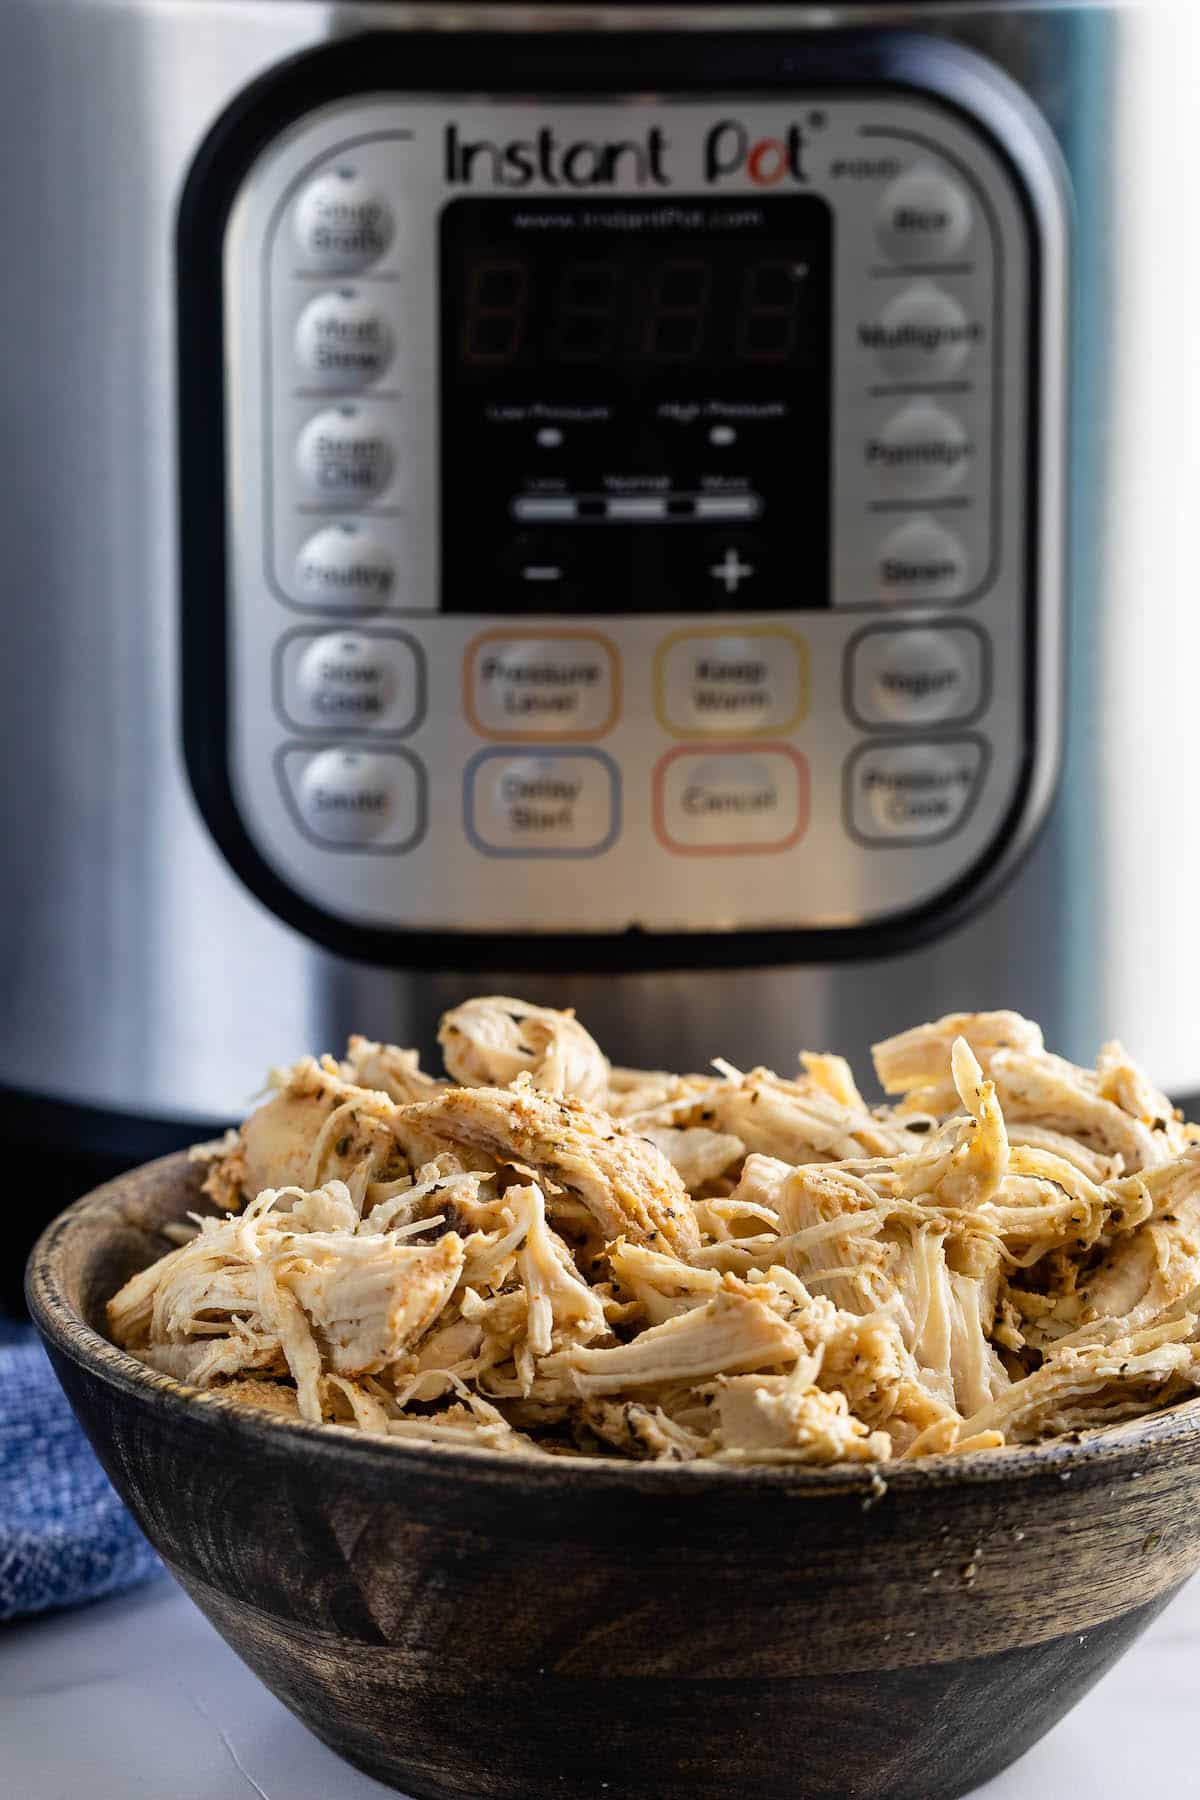 shredded chicken in a brown bowl with an instant pot behind